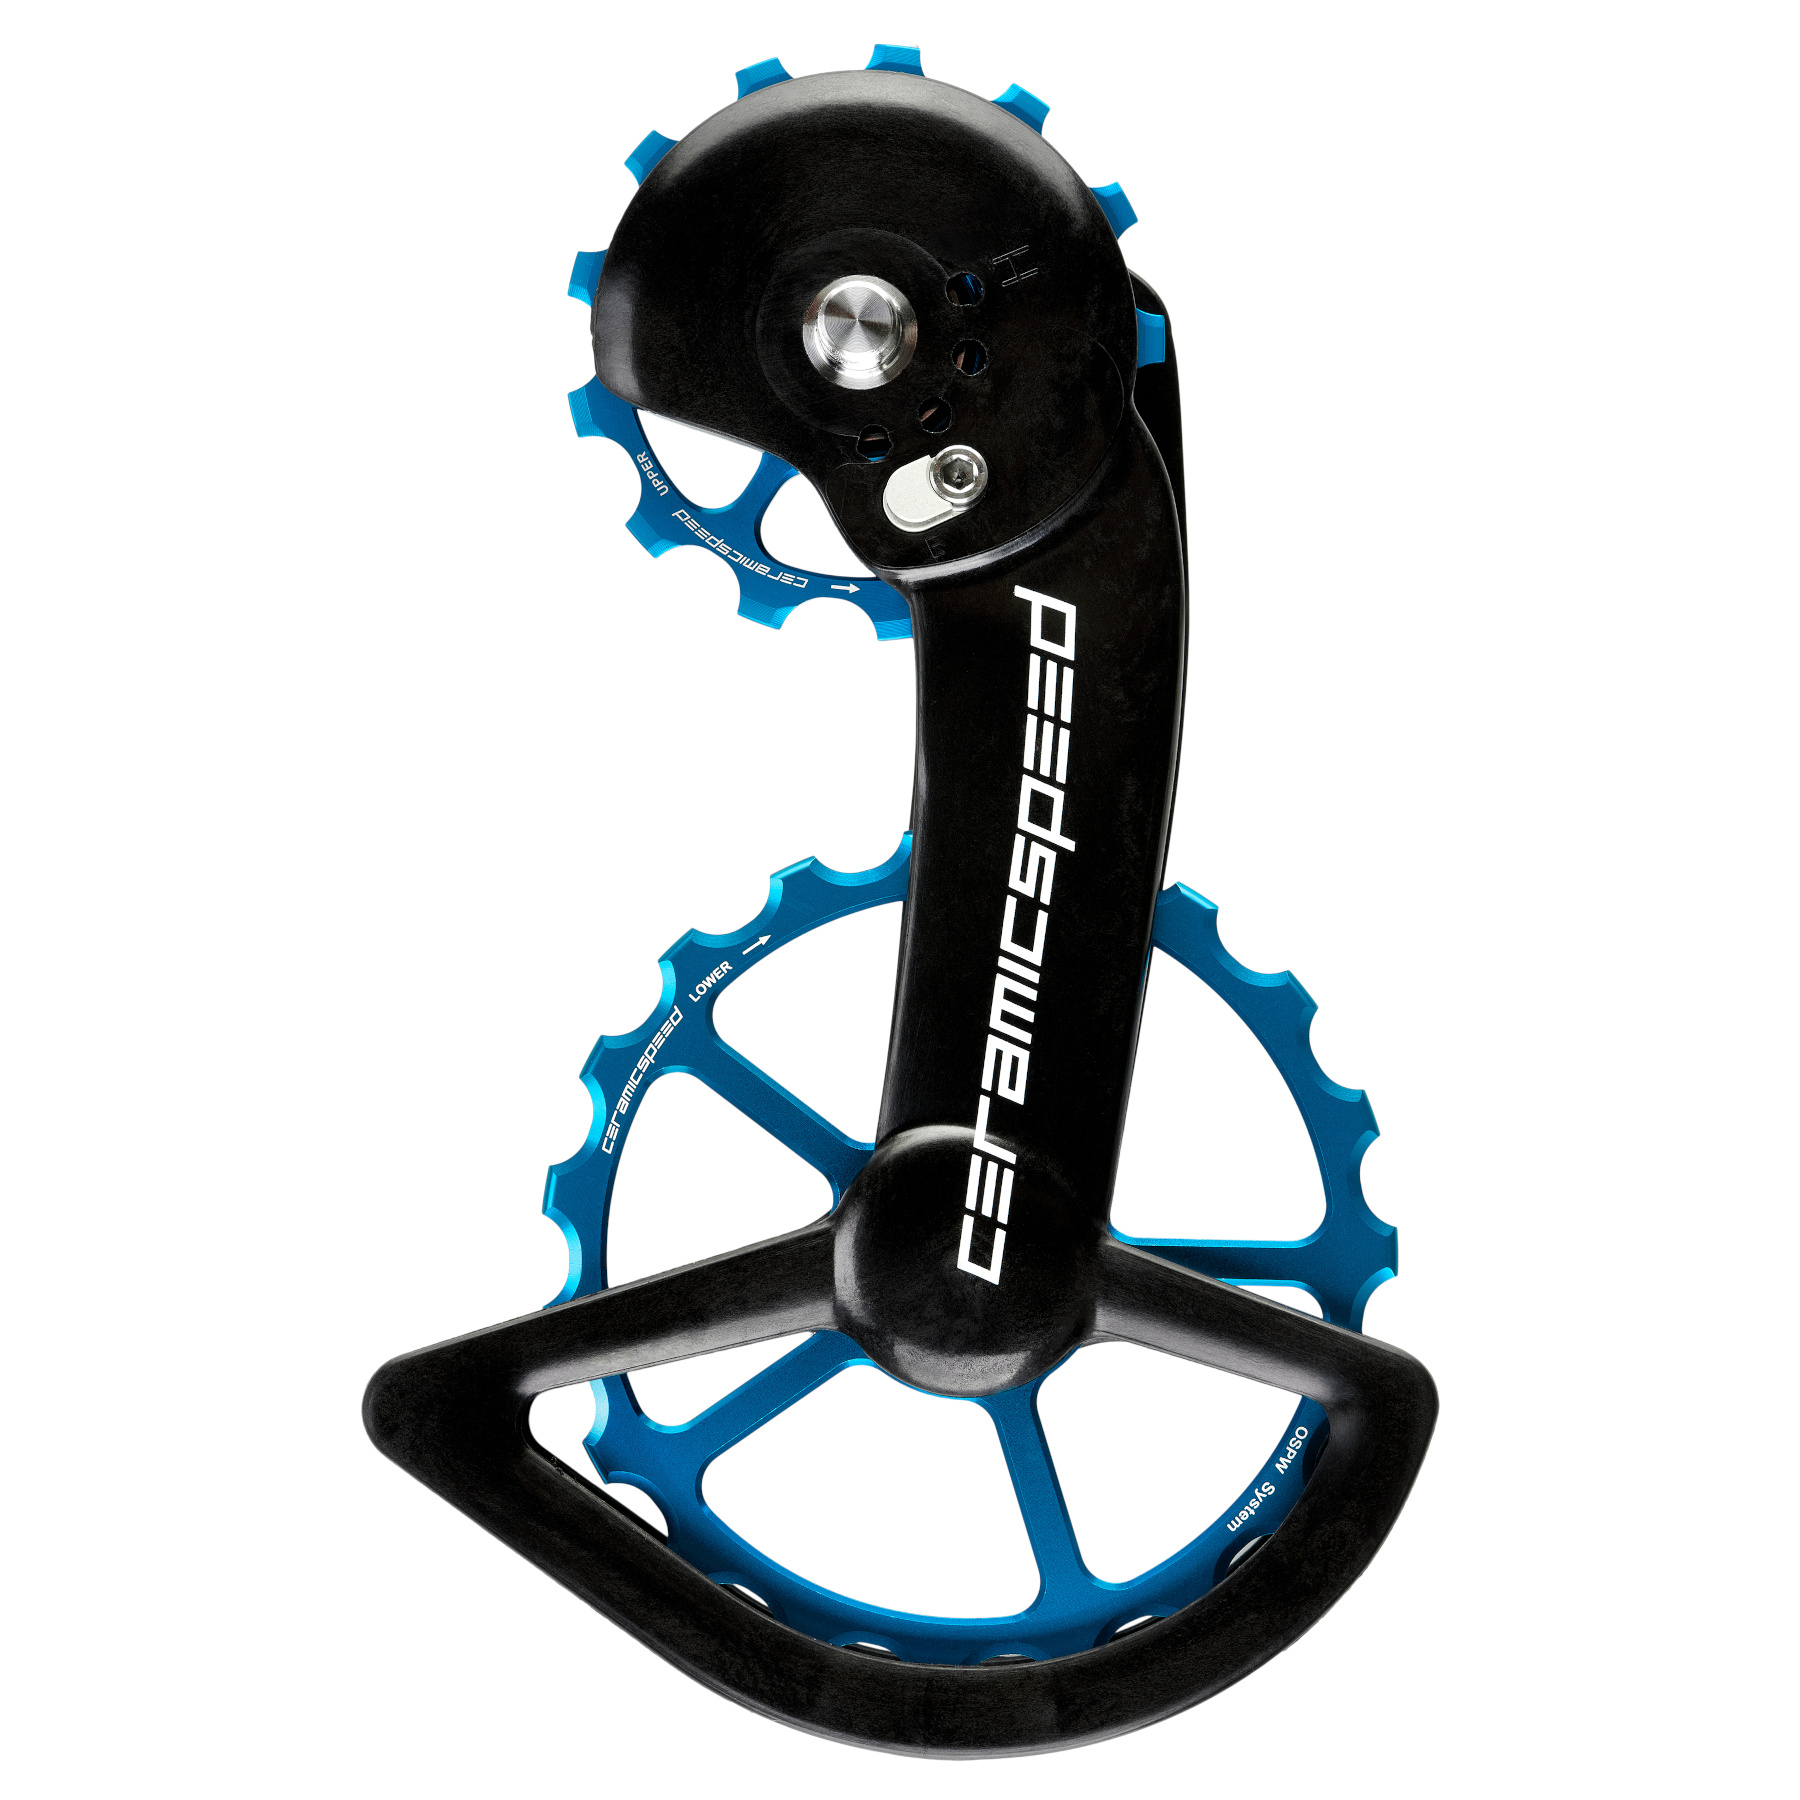 Picture of CeramicSpeed OSPW X Derailleur Pulley System - for Shimano GRX/Ultegra RX | 13/19 Teeth | Coated Bearings - blue